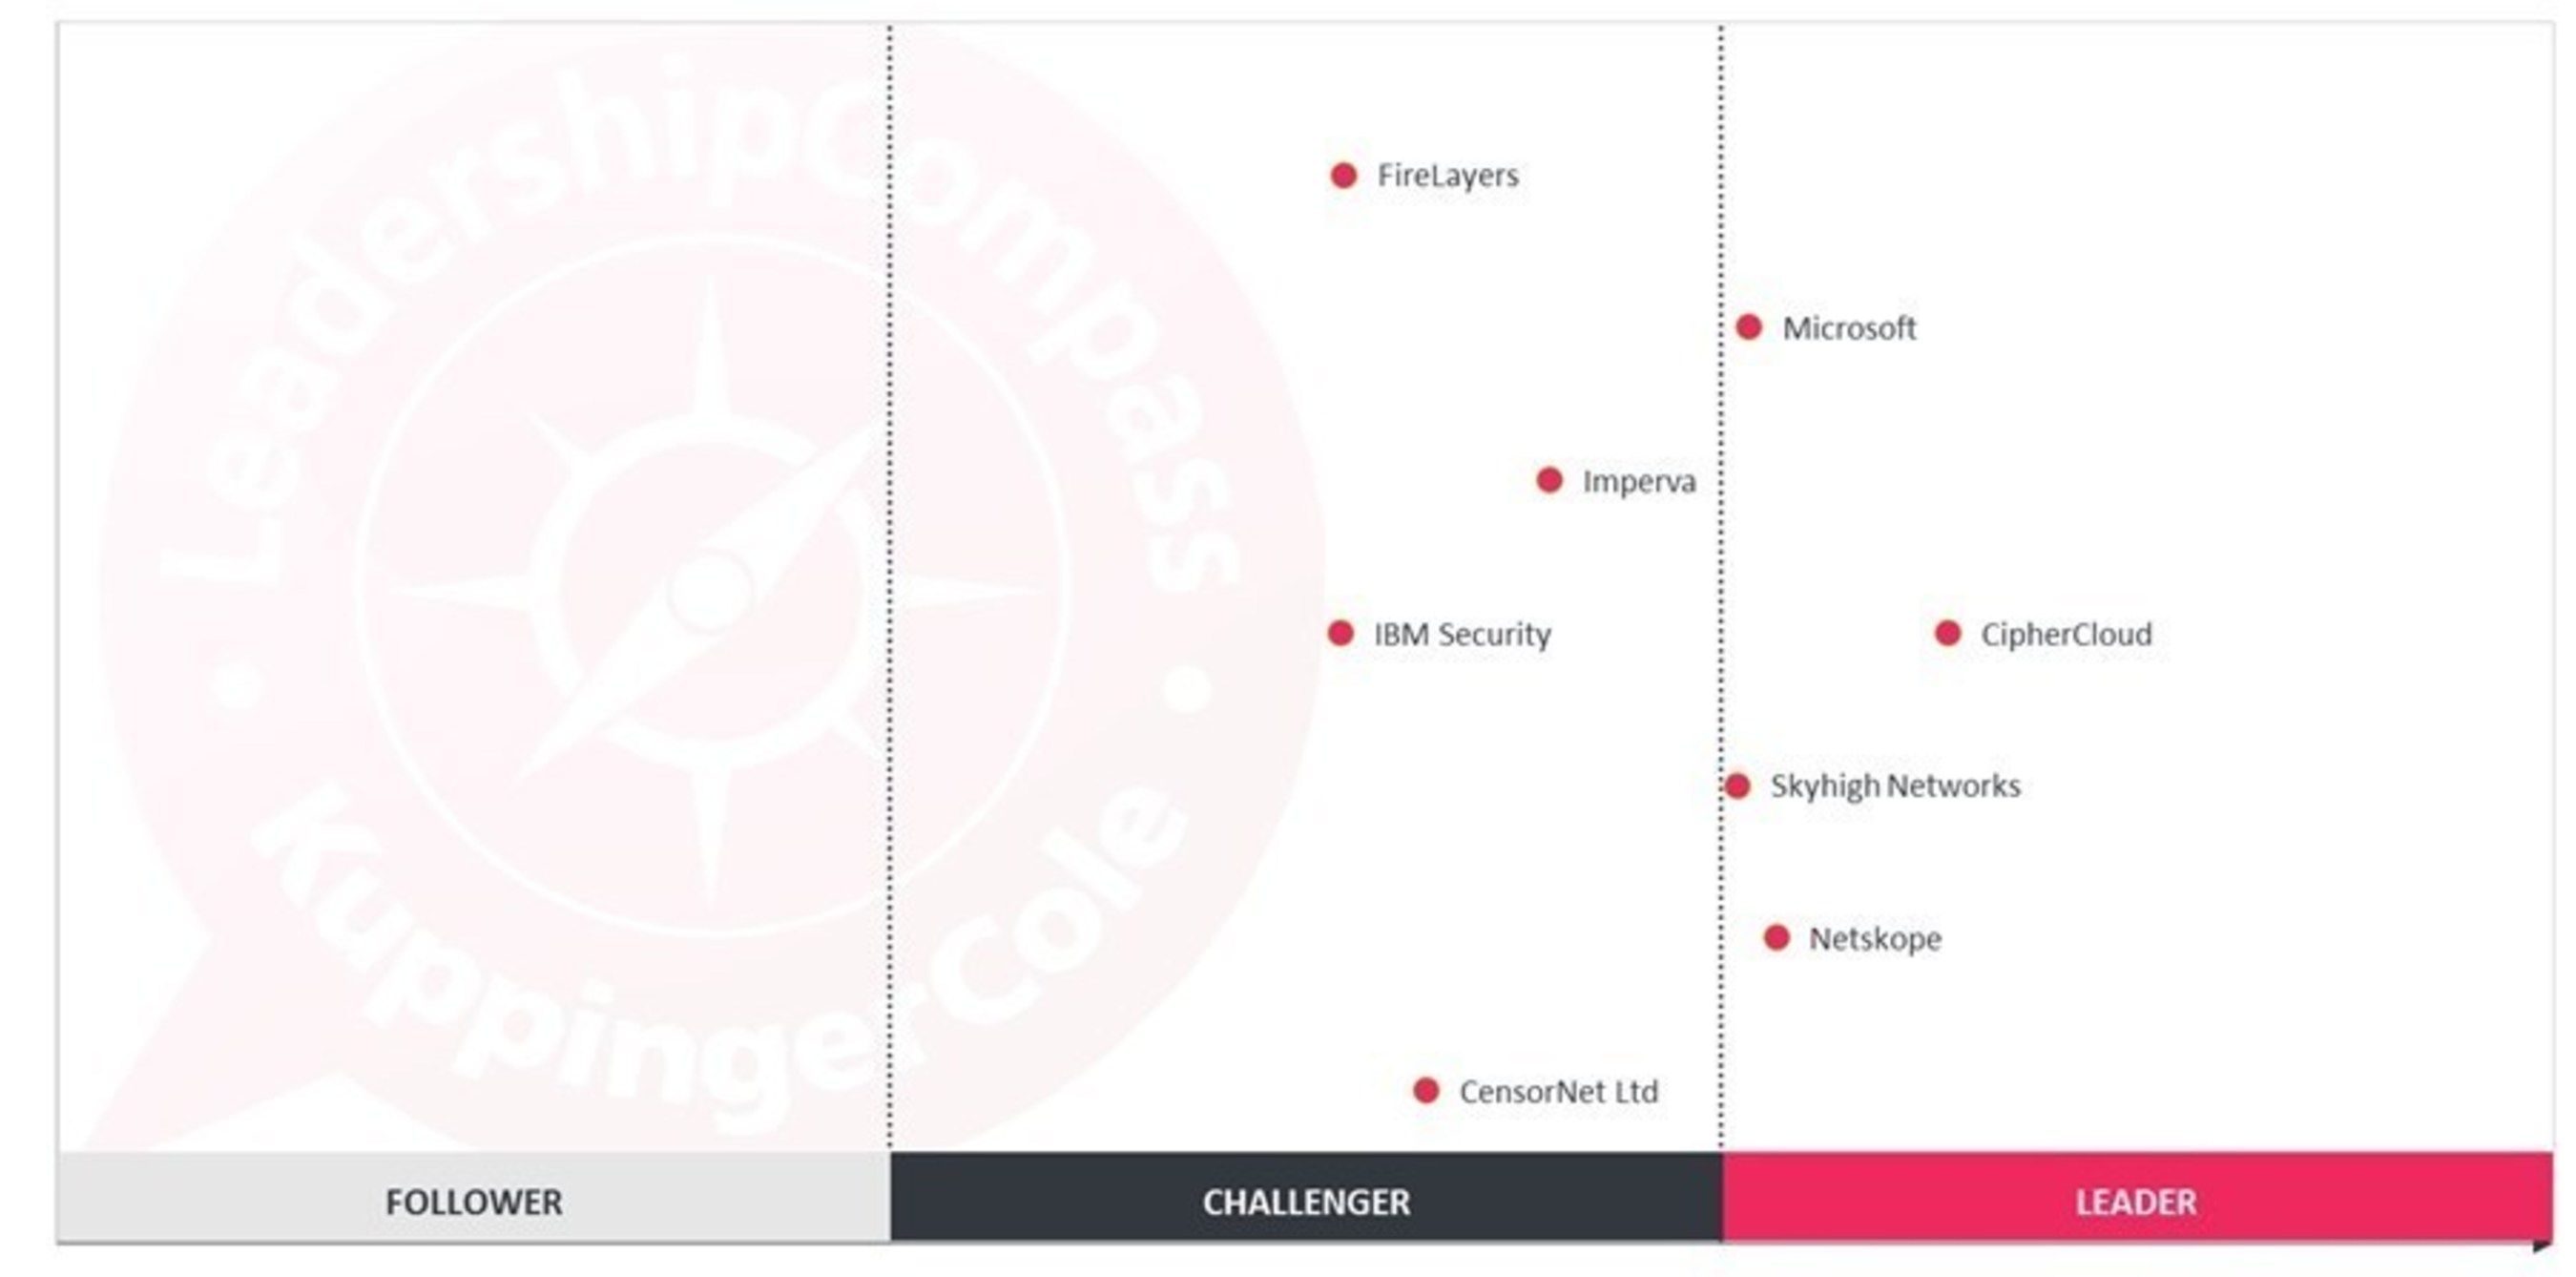 CipherCloud was named the "overall leader" in KuppingerCole's CASB Leadership Compass report.